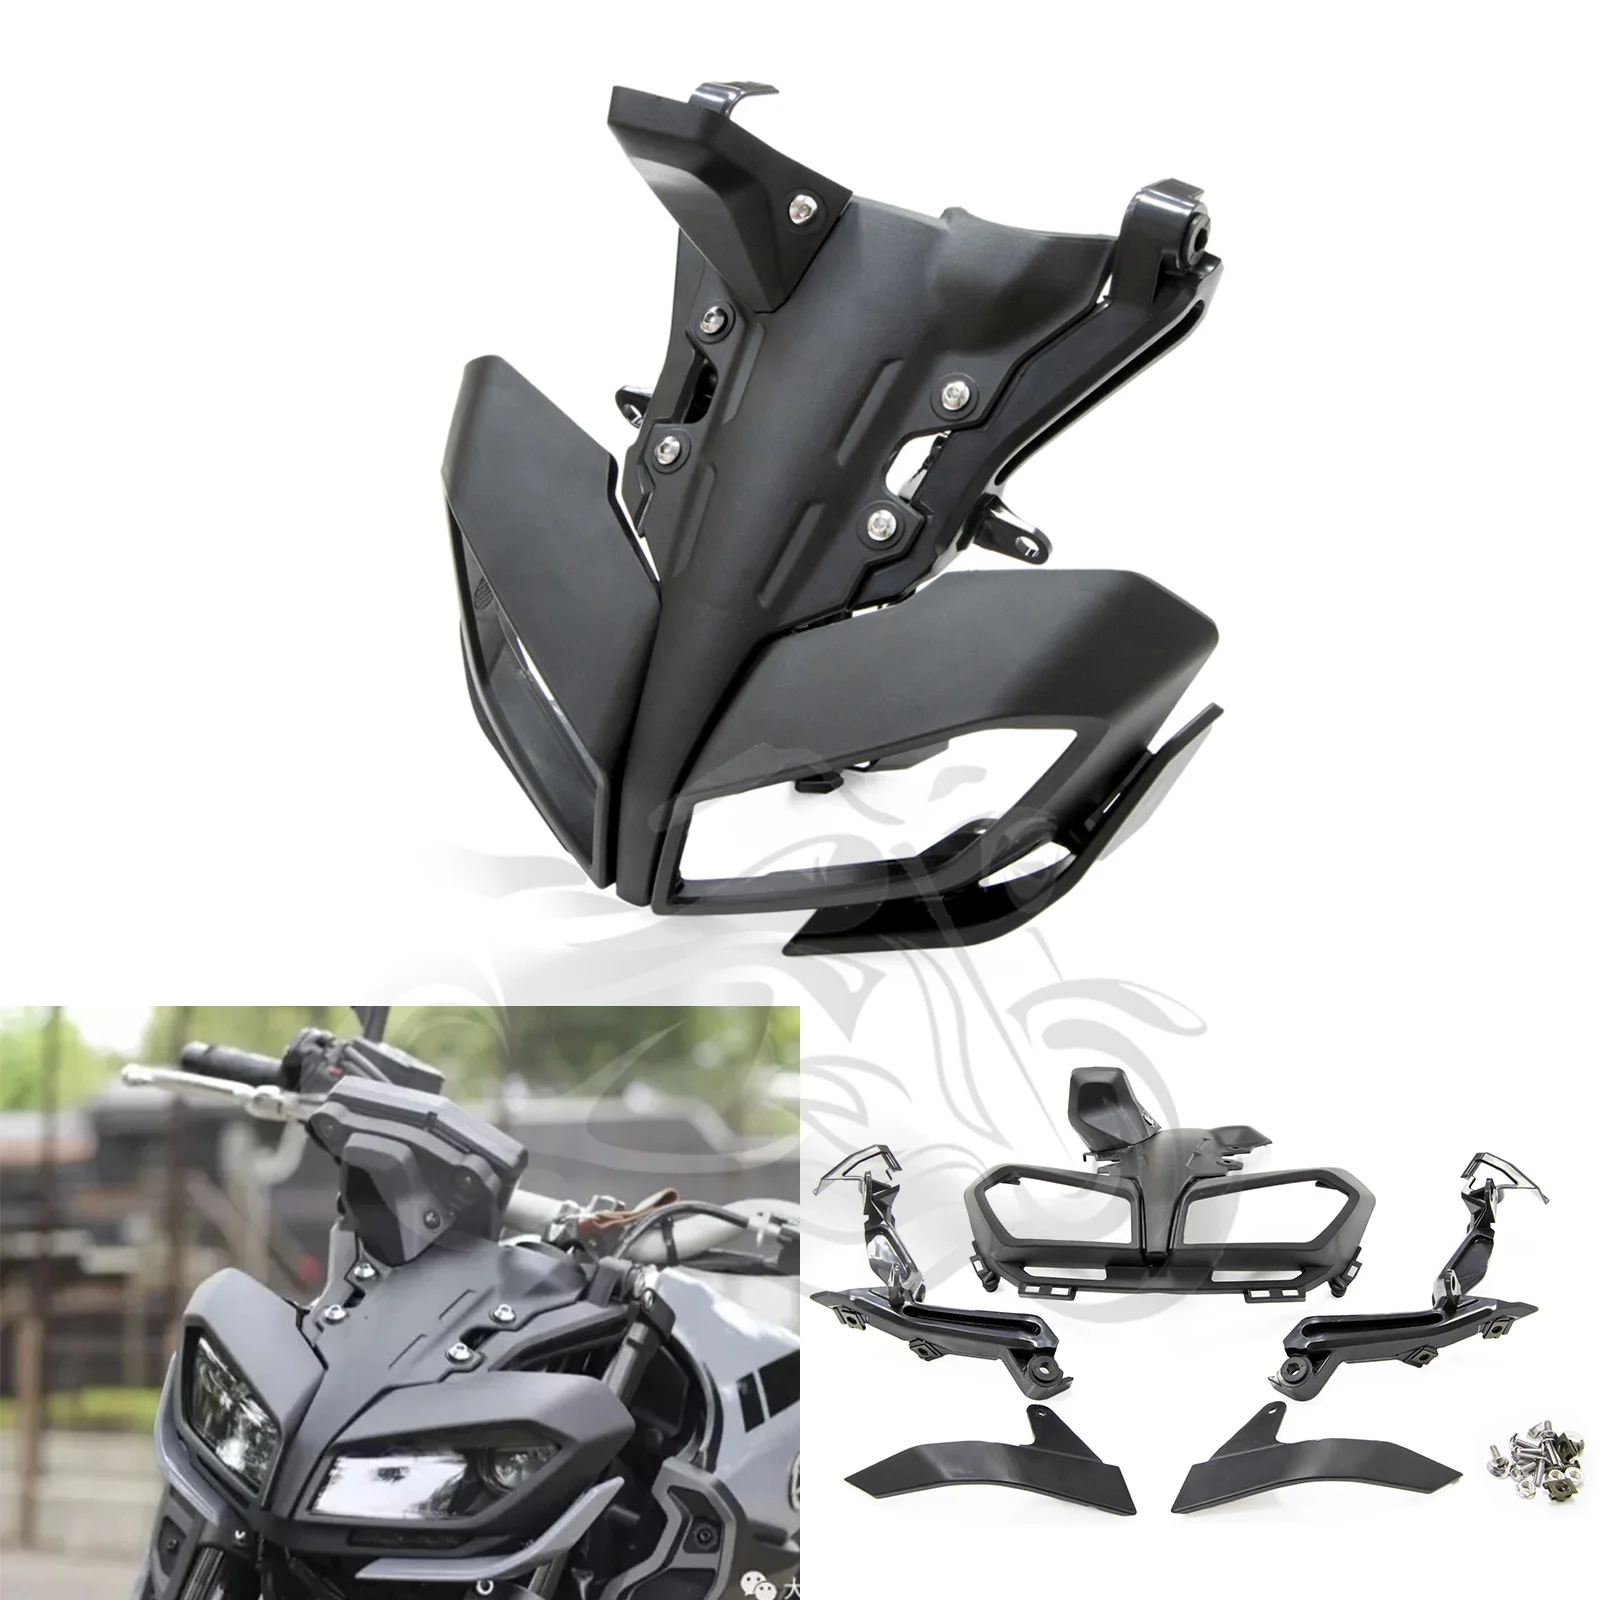 Motorcycle Headlight Front Head Cowl Upper Nose Fairing Holder Cover Set Fit for MT-09 MT09 MT 09 2017 2018 2019 2020 FZ-09 fz09